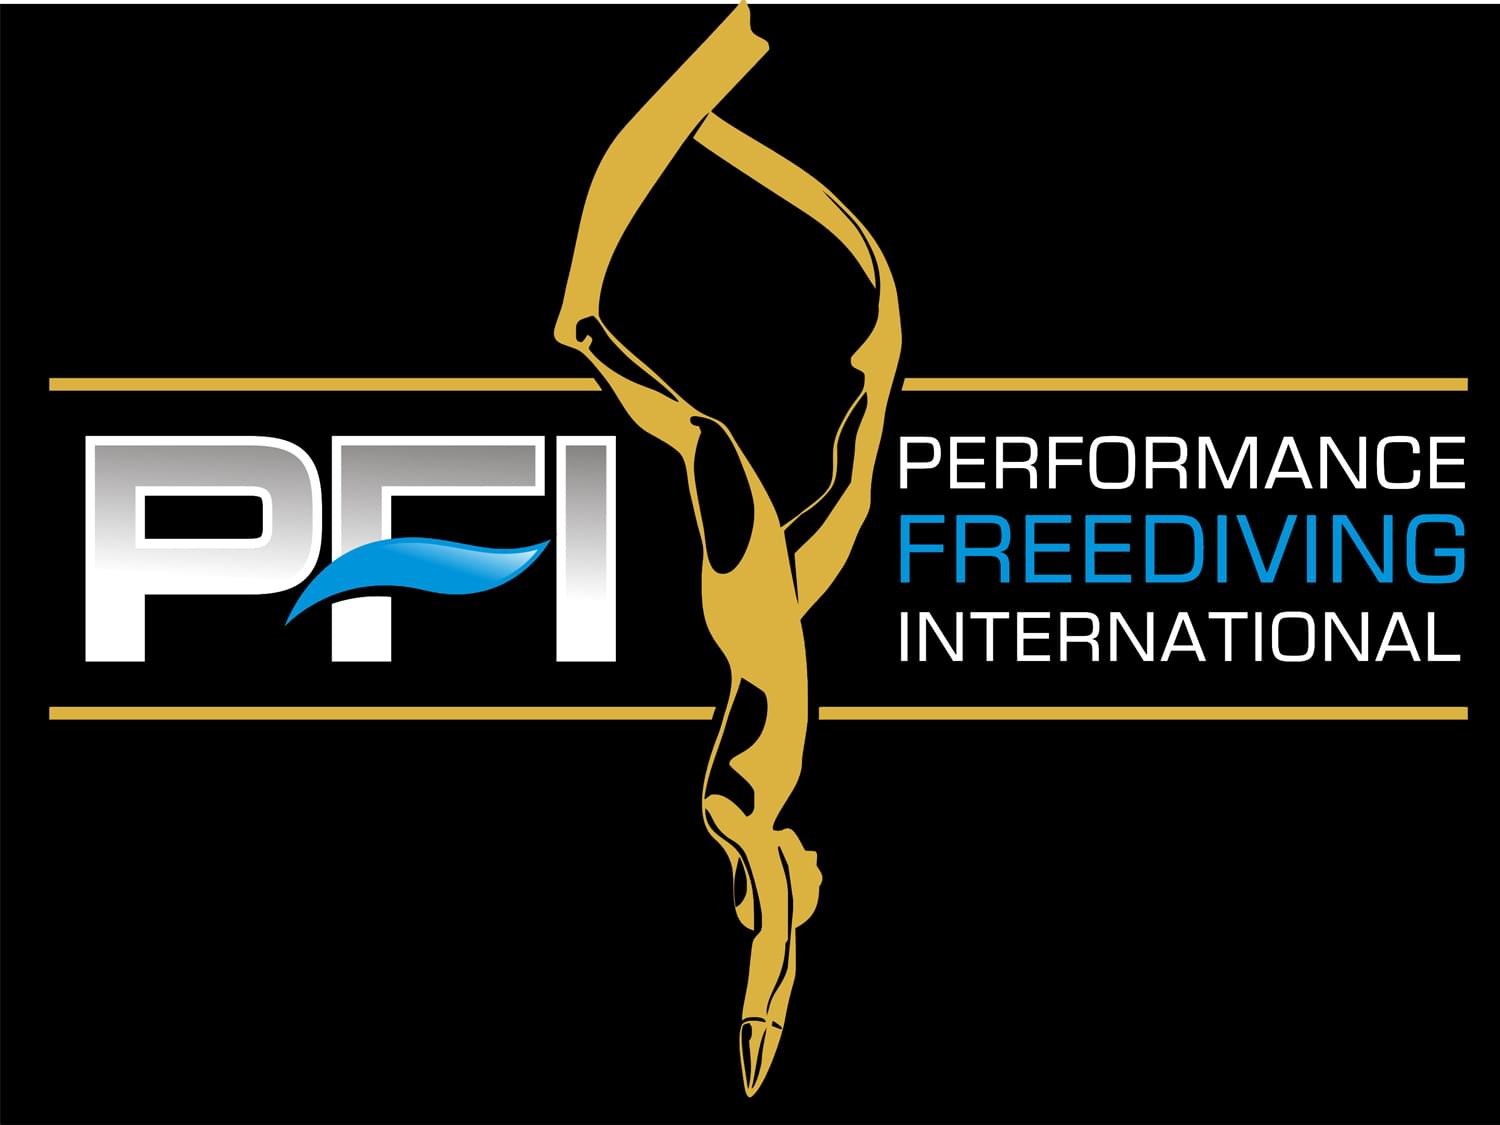 Learn more about PFI